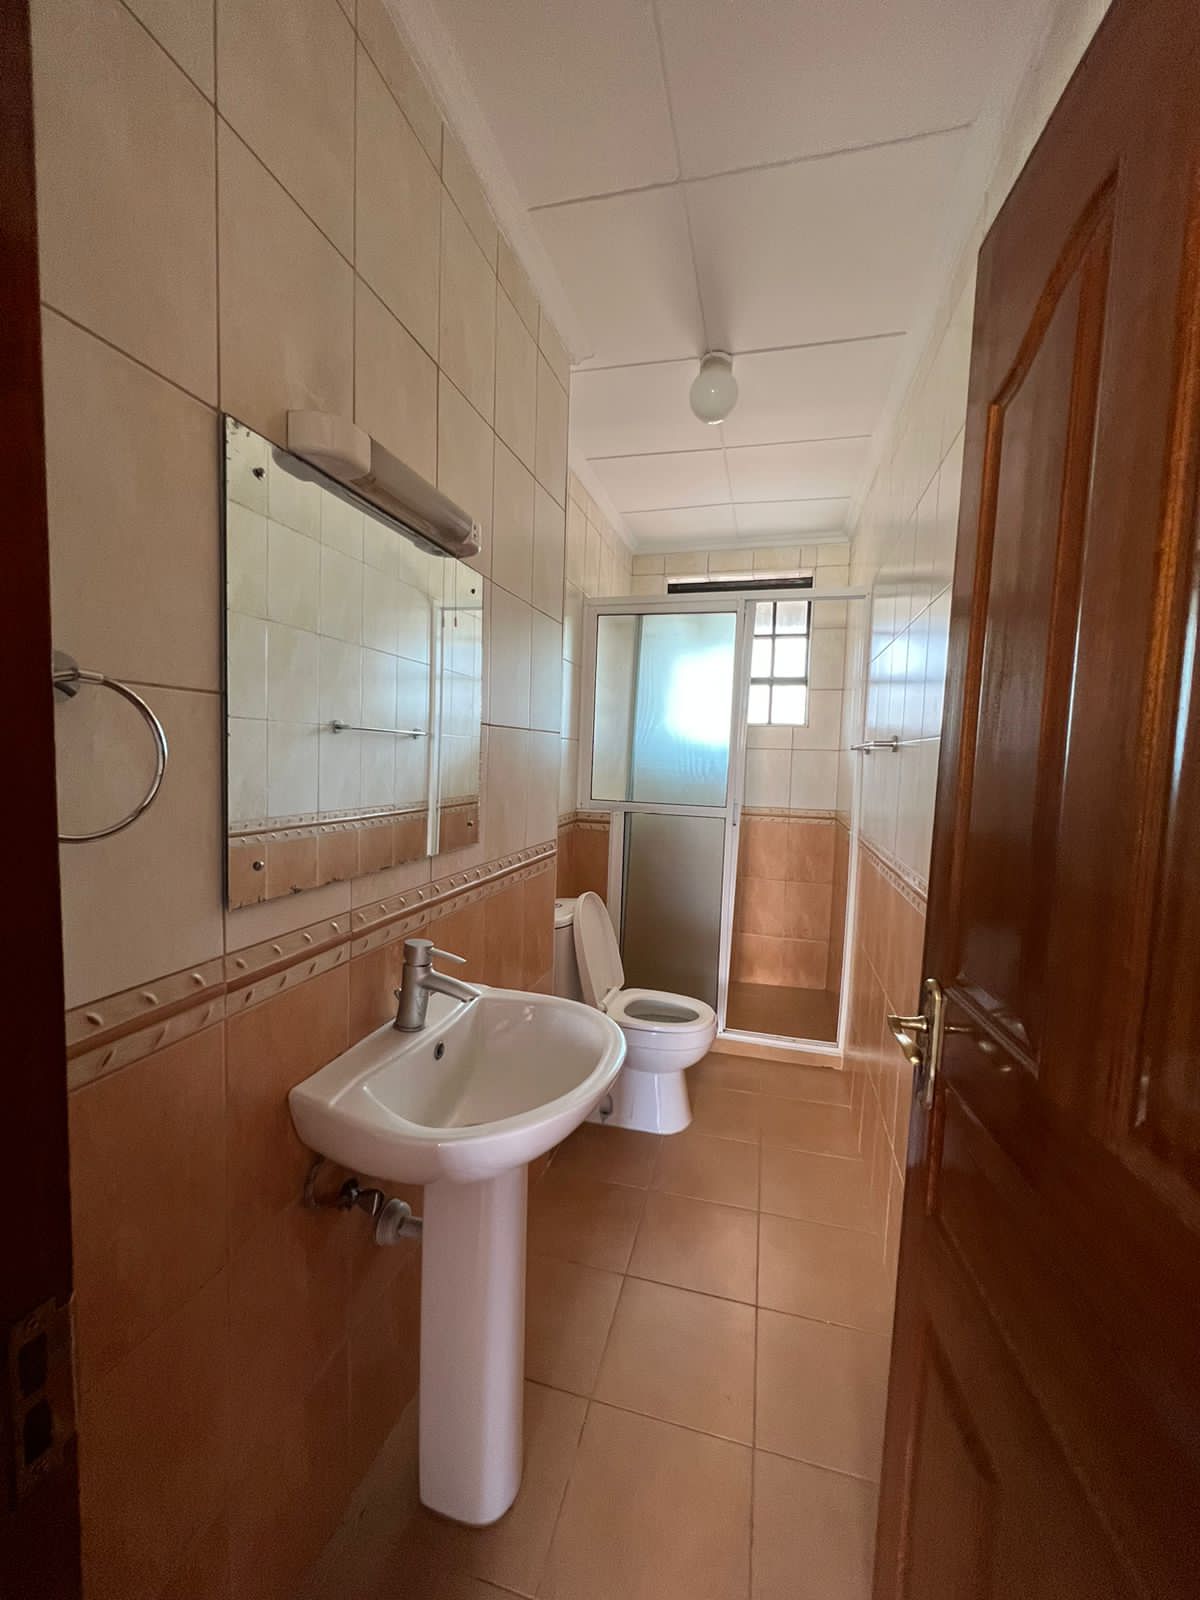 4 bedroom apartment to let and sale In the heart of Kilimani area. Musilli Homes